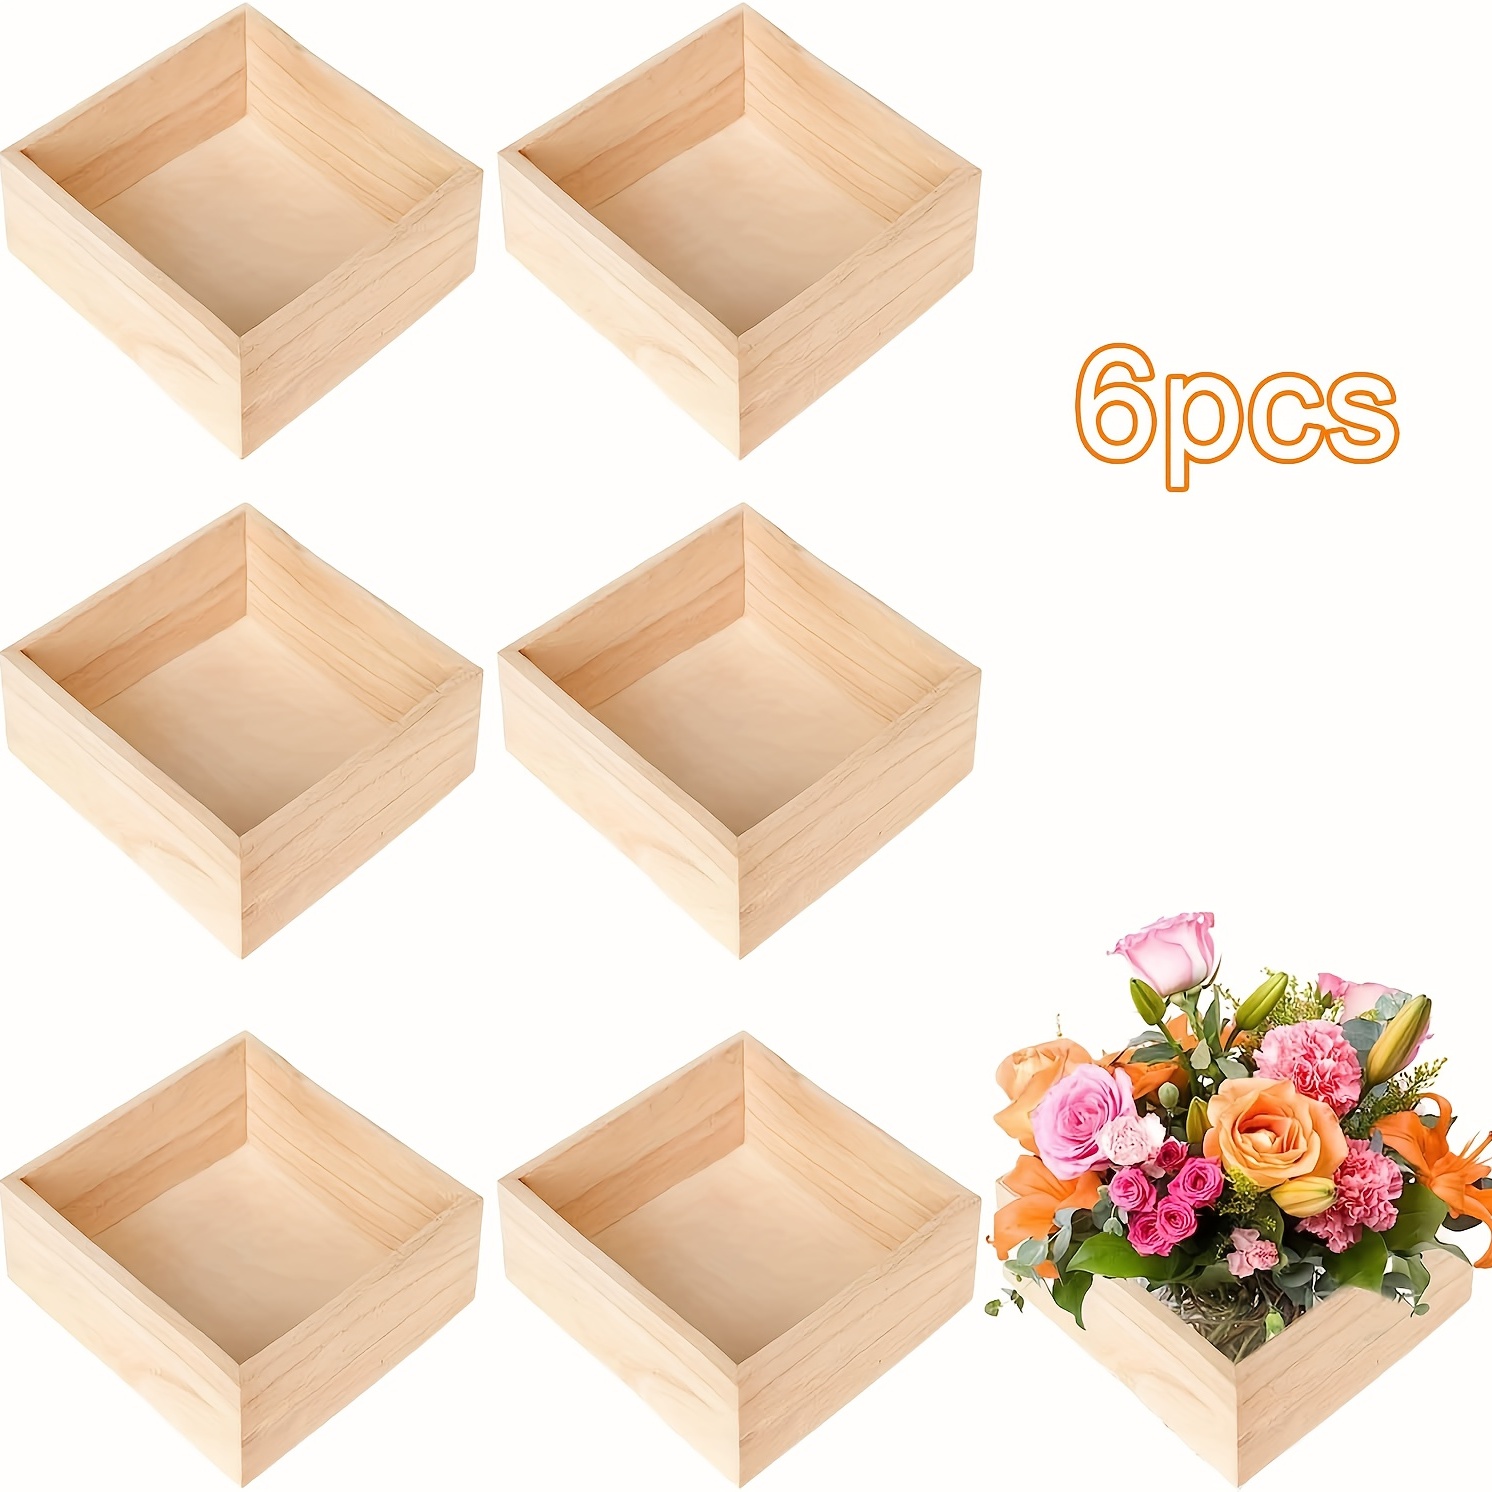 Small Wooden Box, 4.7x 3.54x2in Natural Pine Unpainted Wooden Box For  Crafts DIY Wooden Box With Hinge Cover, Used For Art, Hobbies, Jewelry  Boxes, A